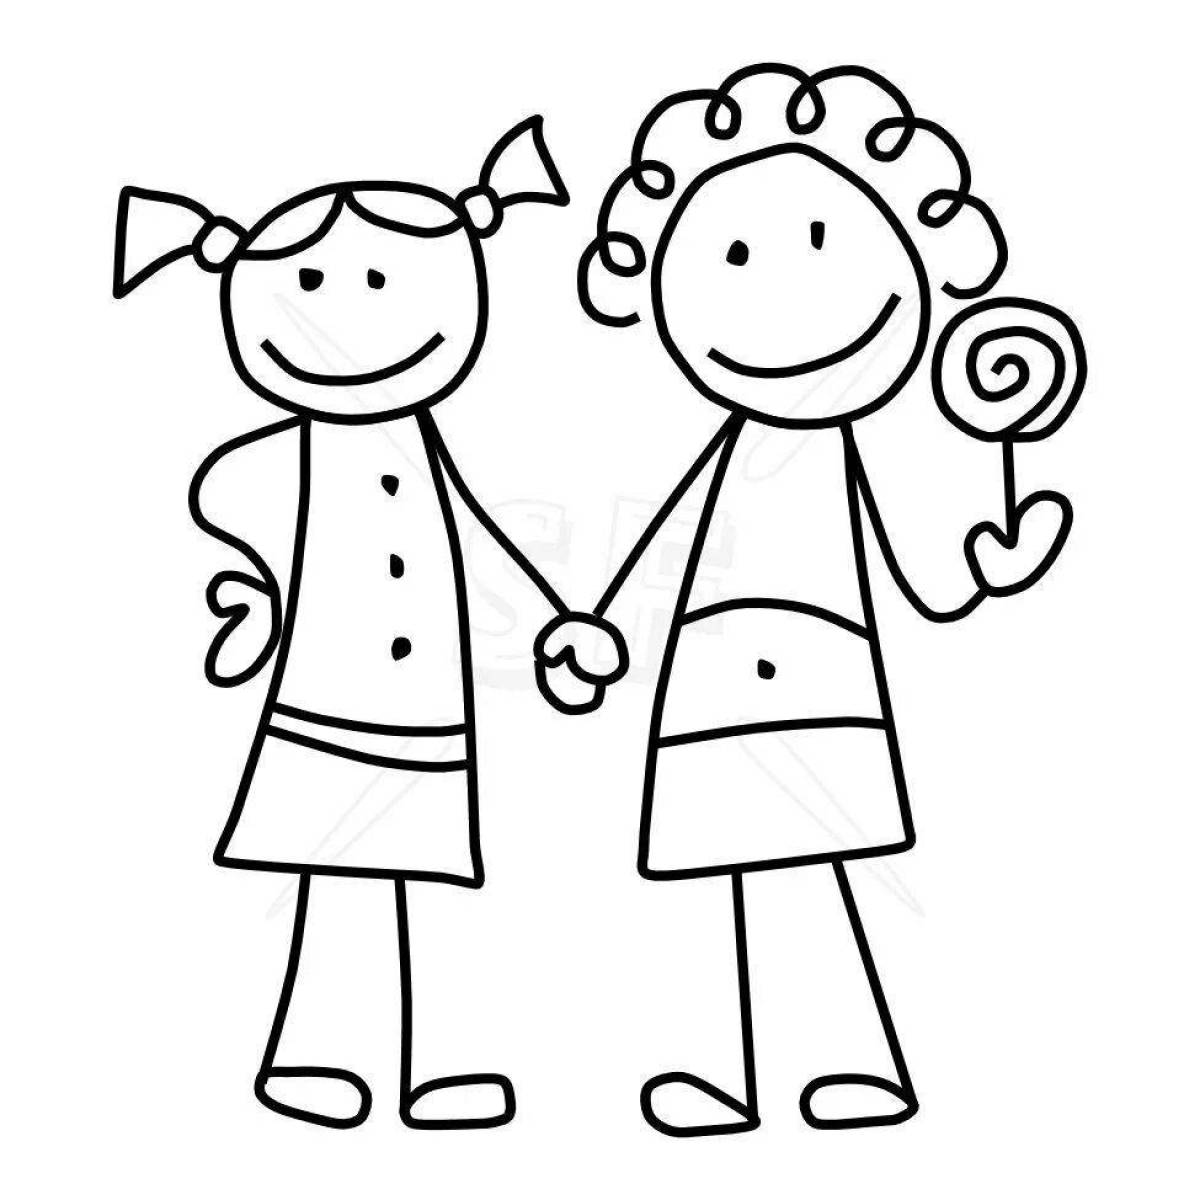 Cute two sisters coloring page